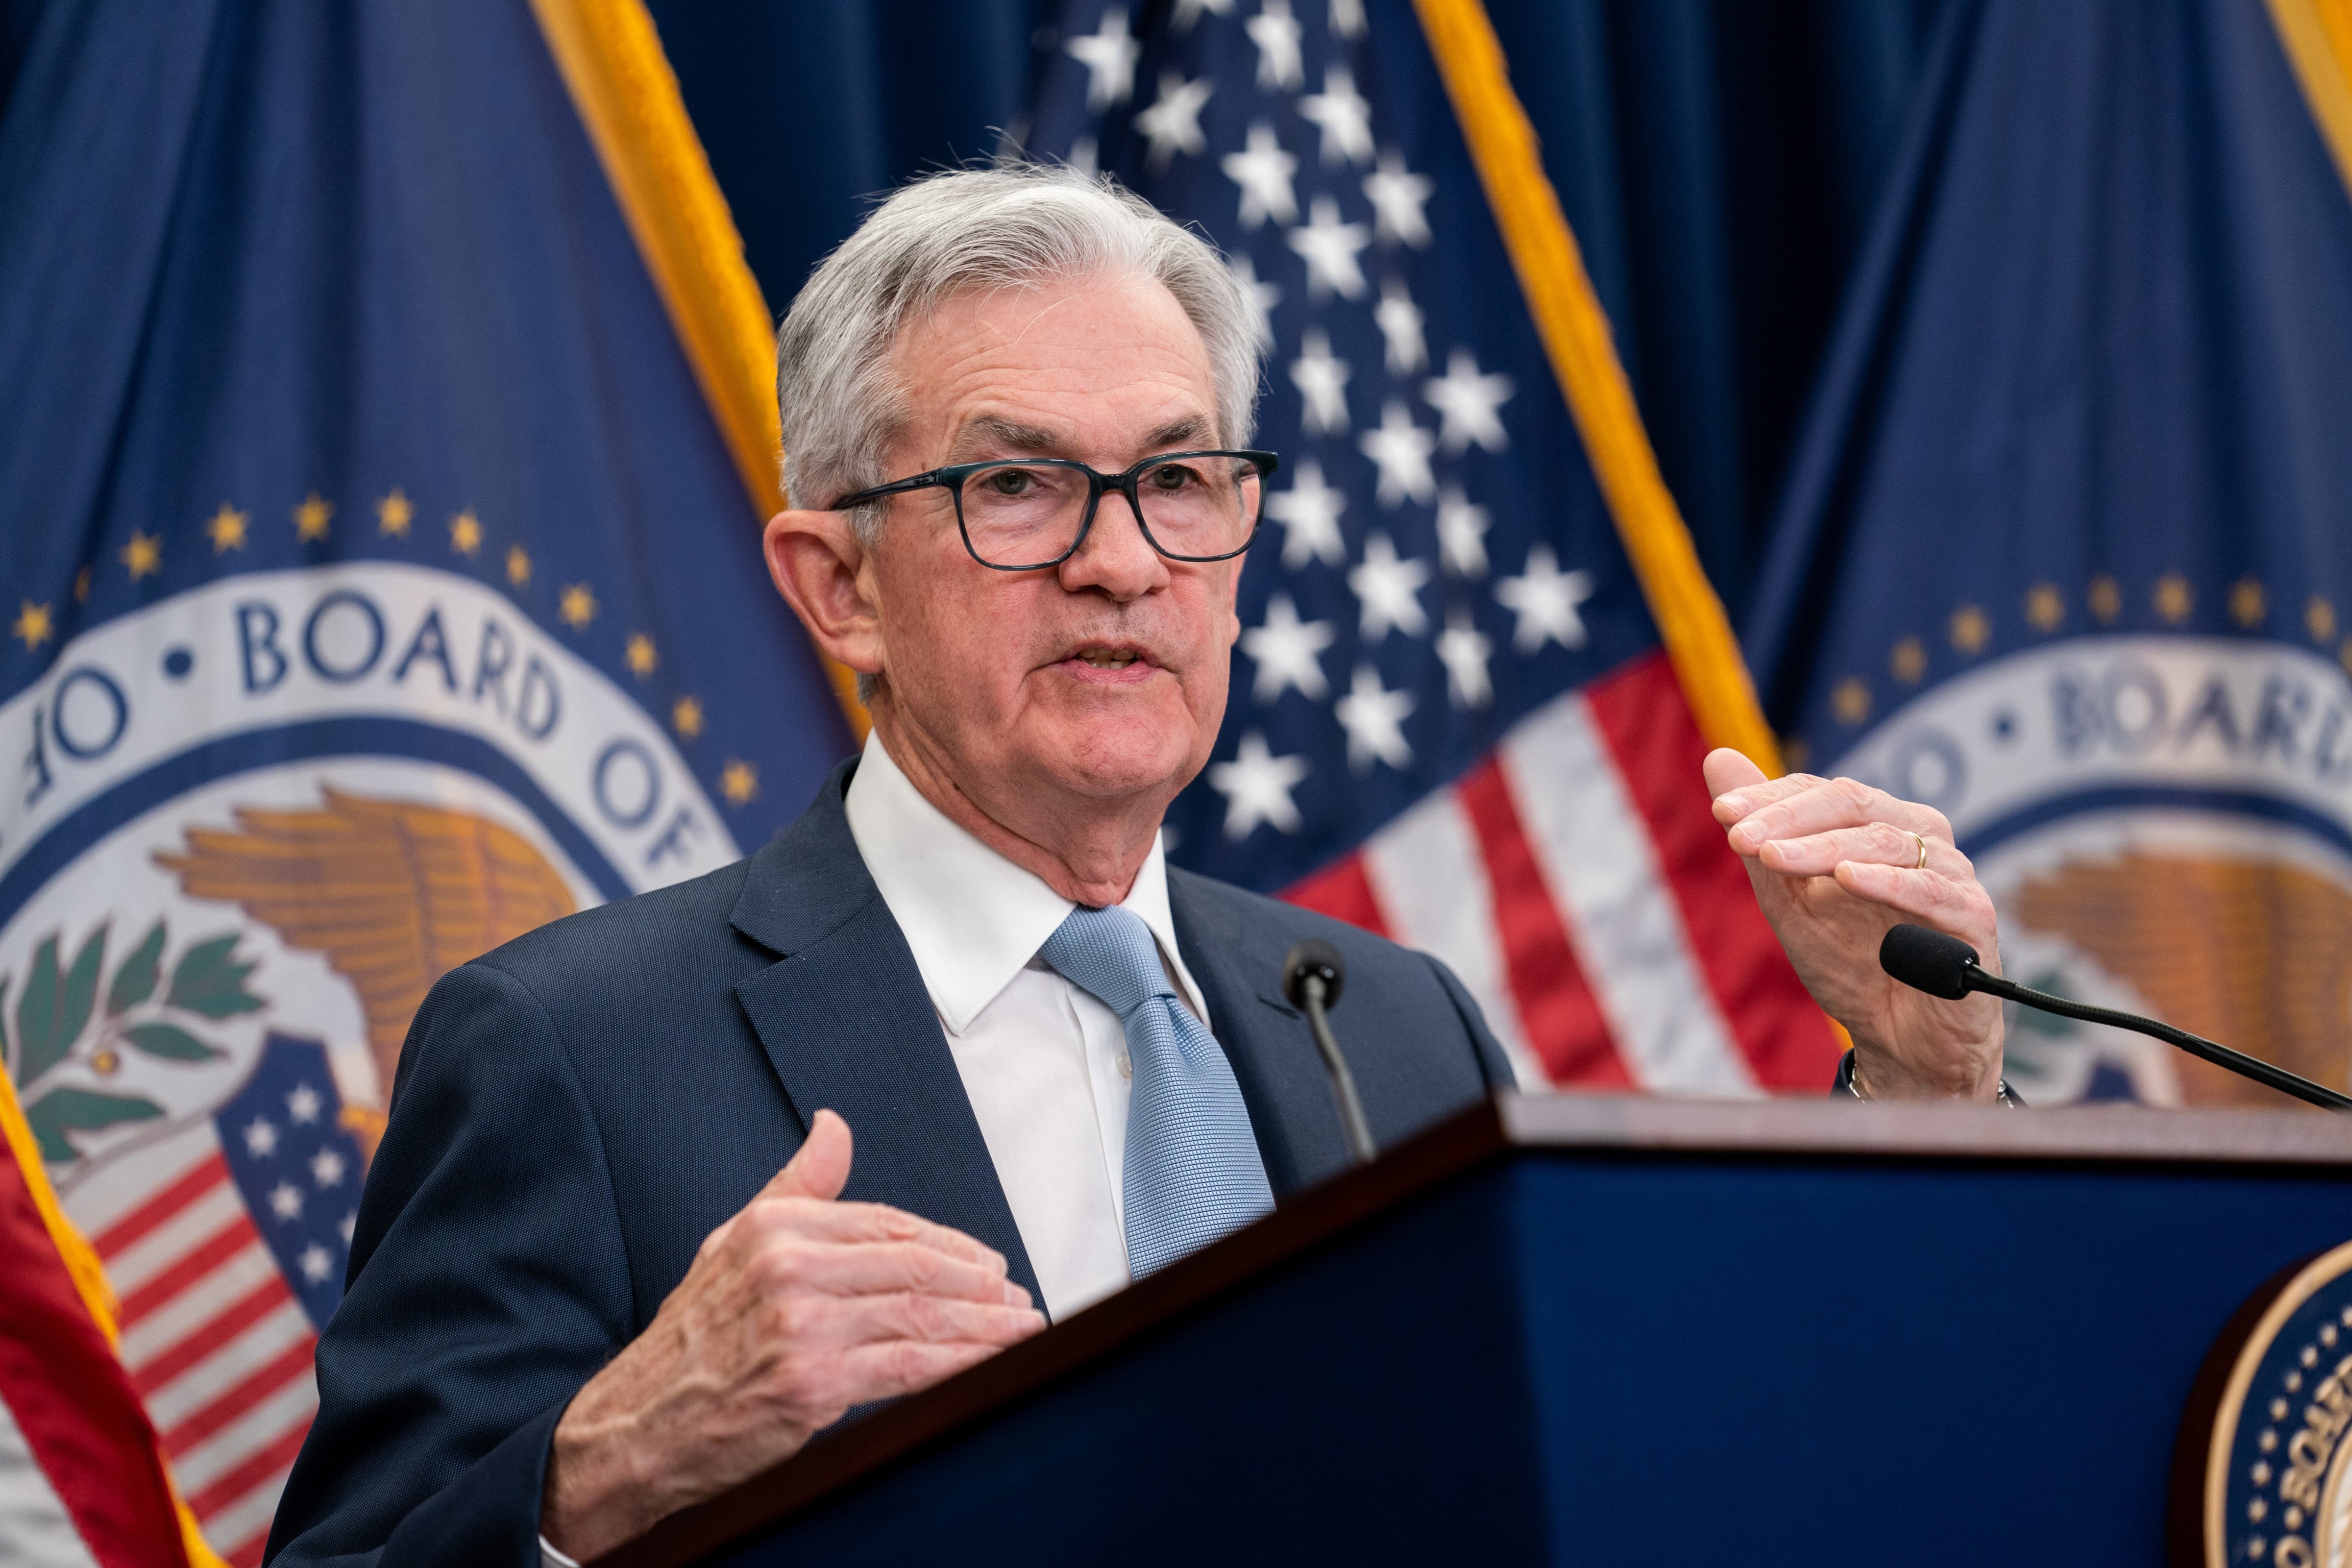 U.S. Federal Reserve Chair Jerome Powell attends a press conference in Washington, D.C., the United States, on Dec. 14, 2022. (Liu Jie––Xinhua via Getty Images)